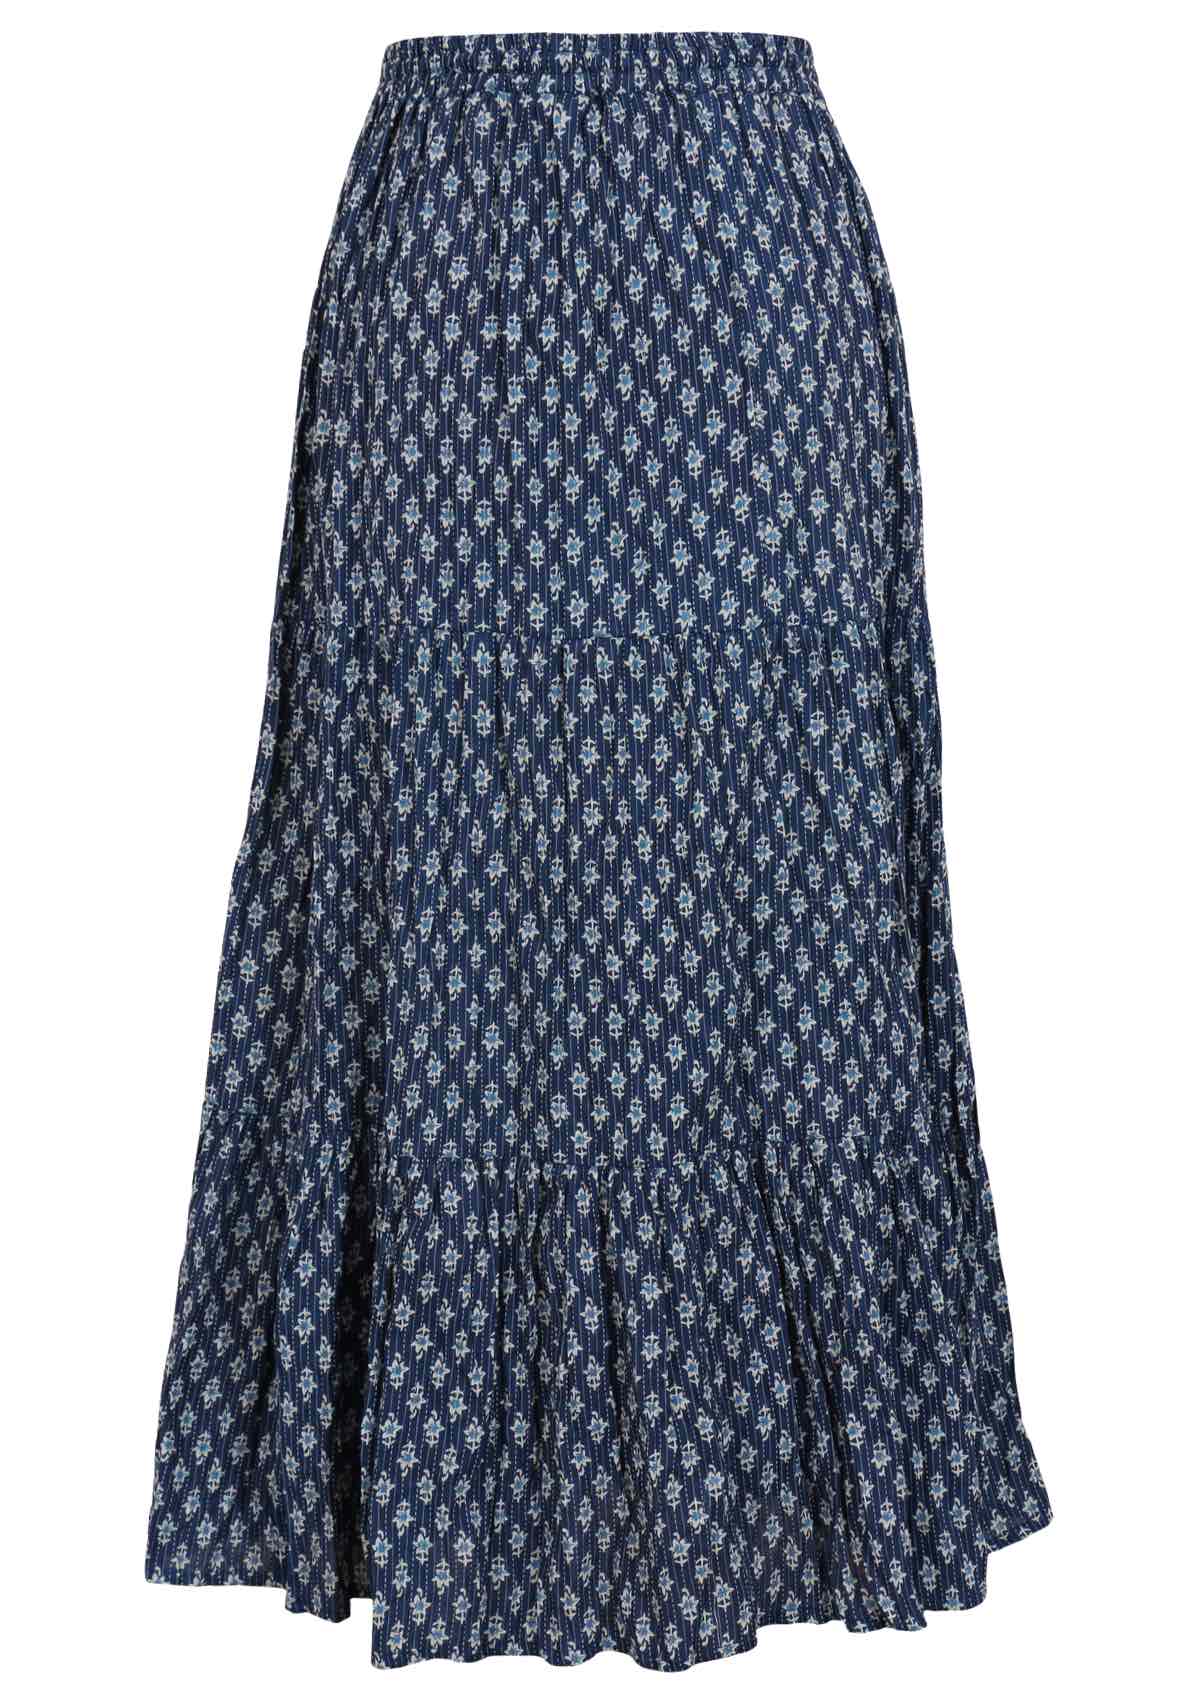 Blue maxi skirt features a decorative floral pattern with kantha stitches. 